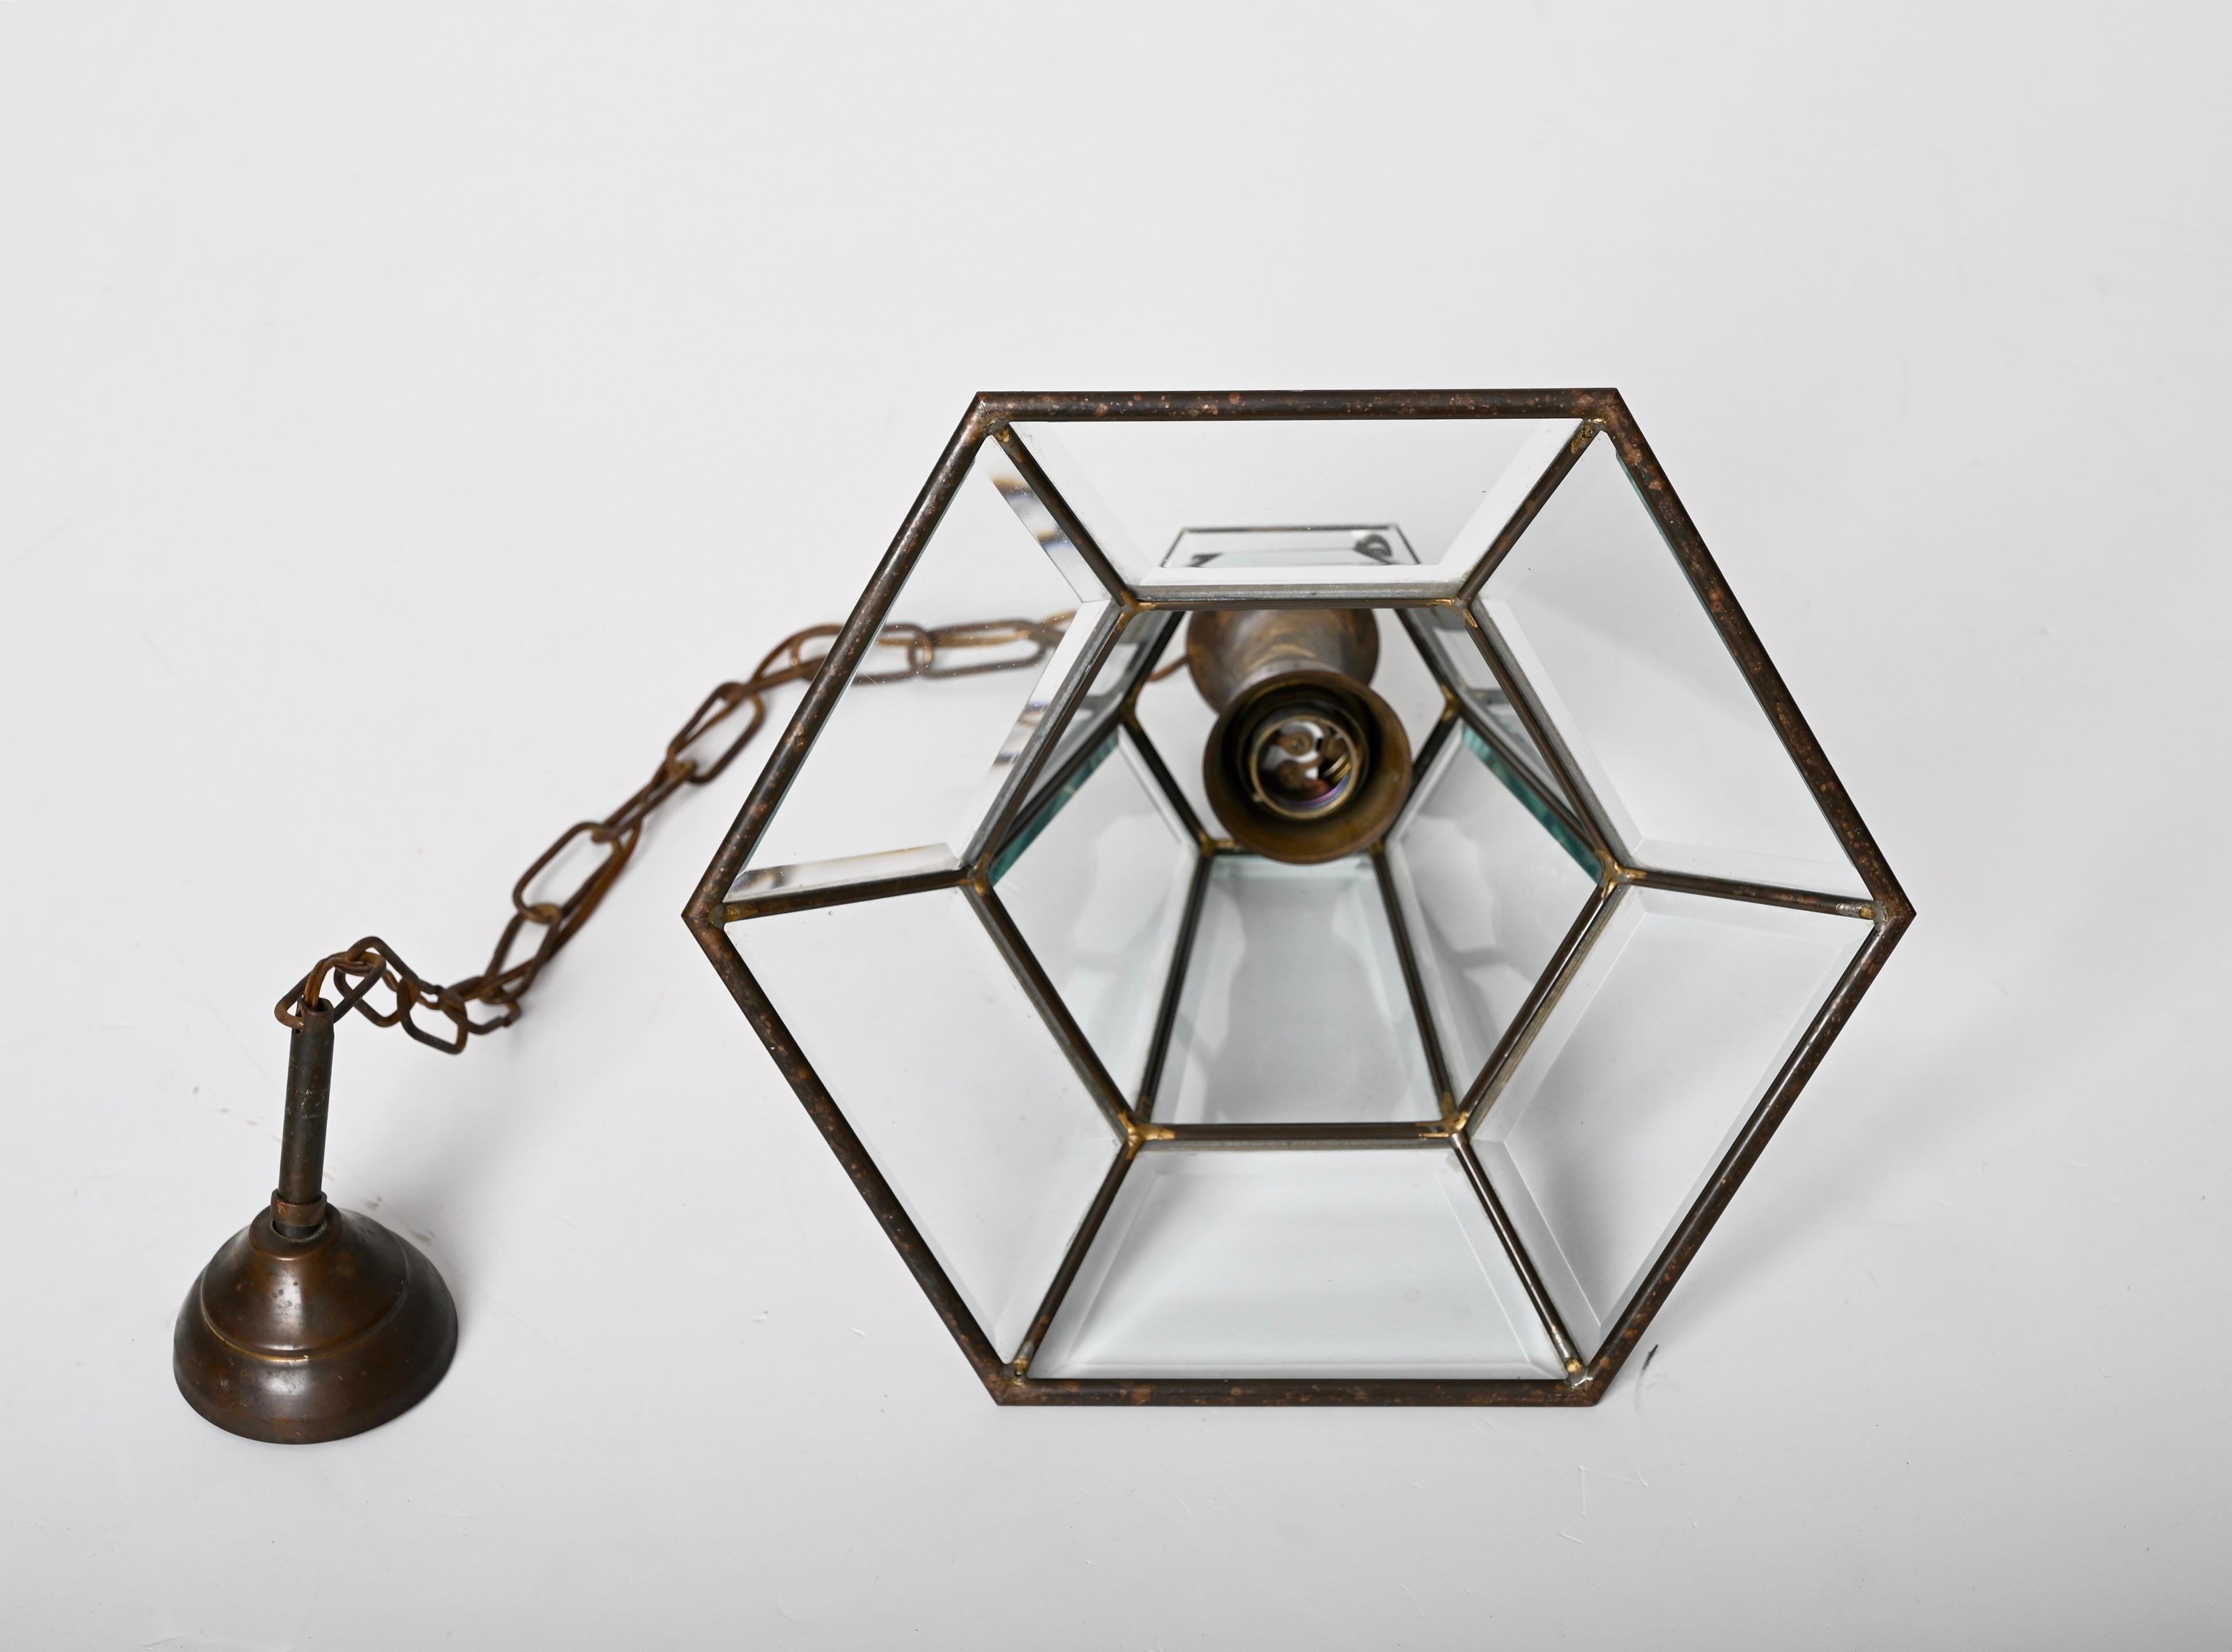 Brass and Beveled Glass Hexagonal Italian Chandelier After Adolf Loos, 1950s For Sale 14